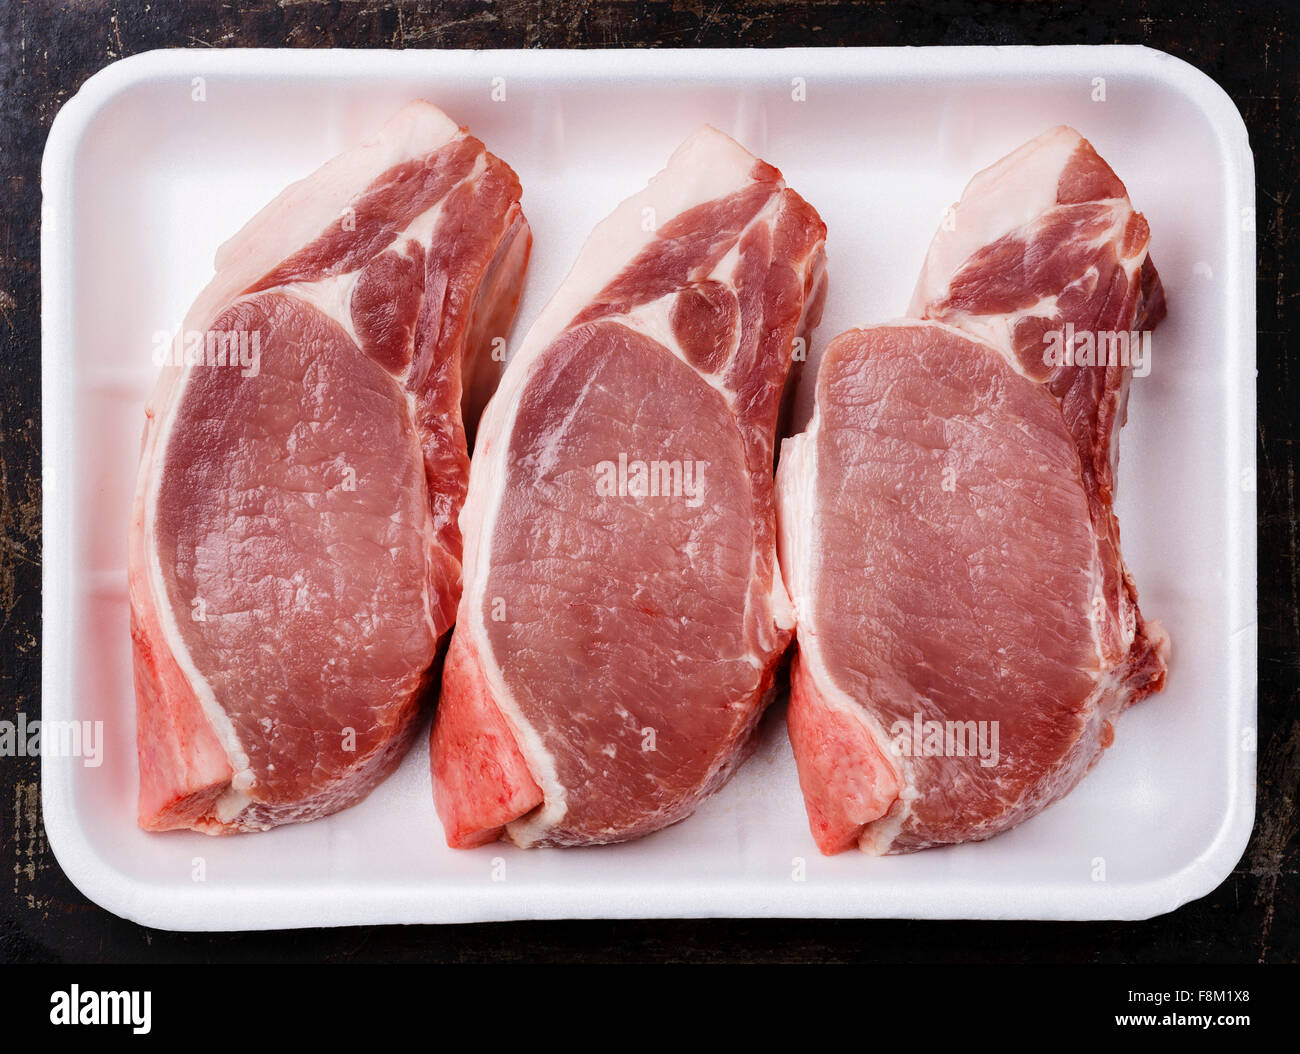 Raw fresh uncooked Pork meat chop steak on bone in white container packaging tray Stock Photo